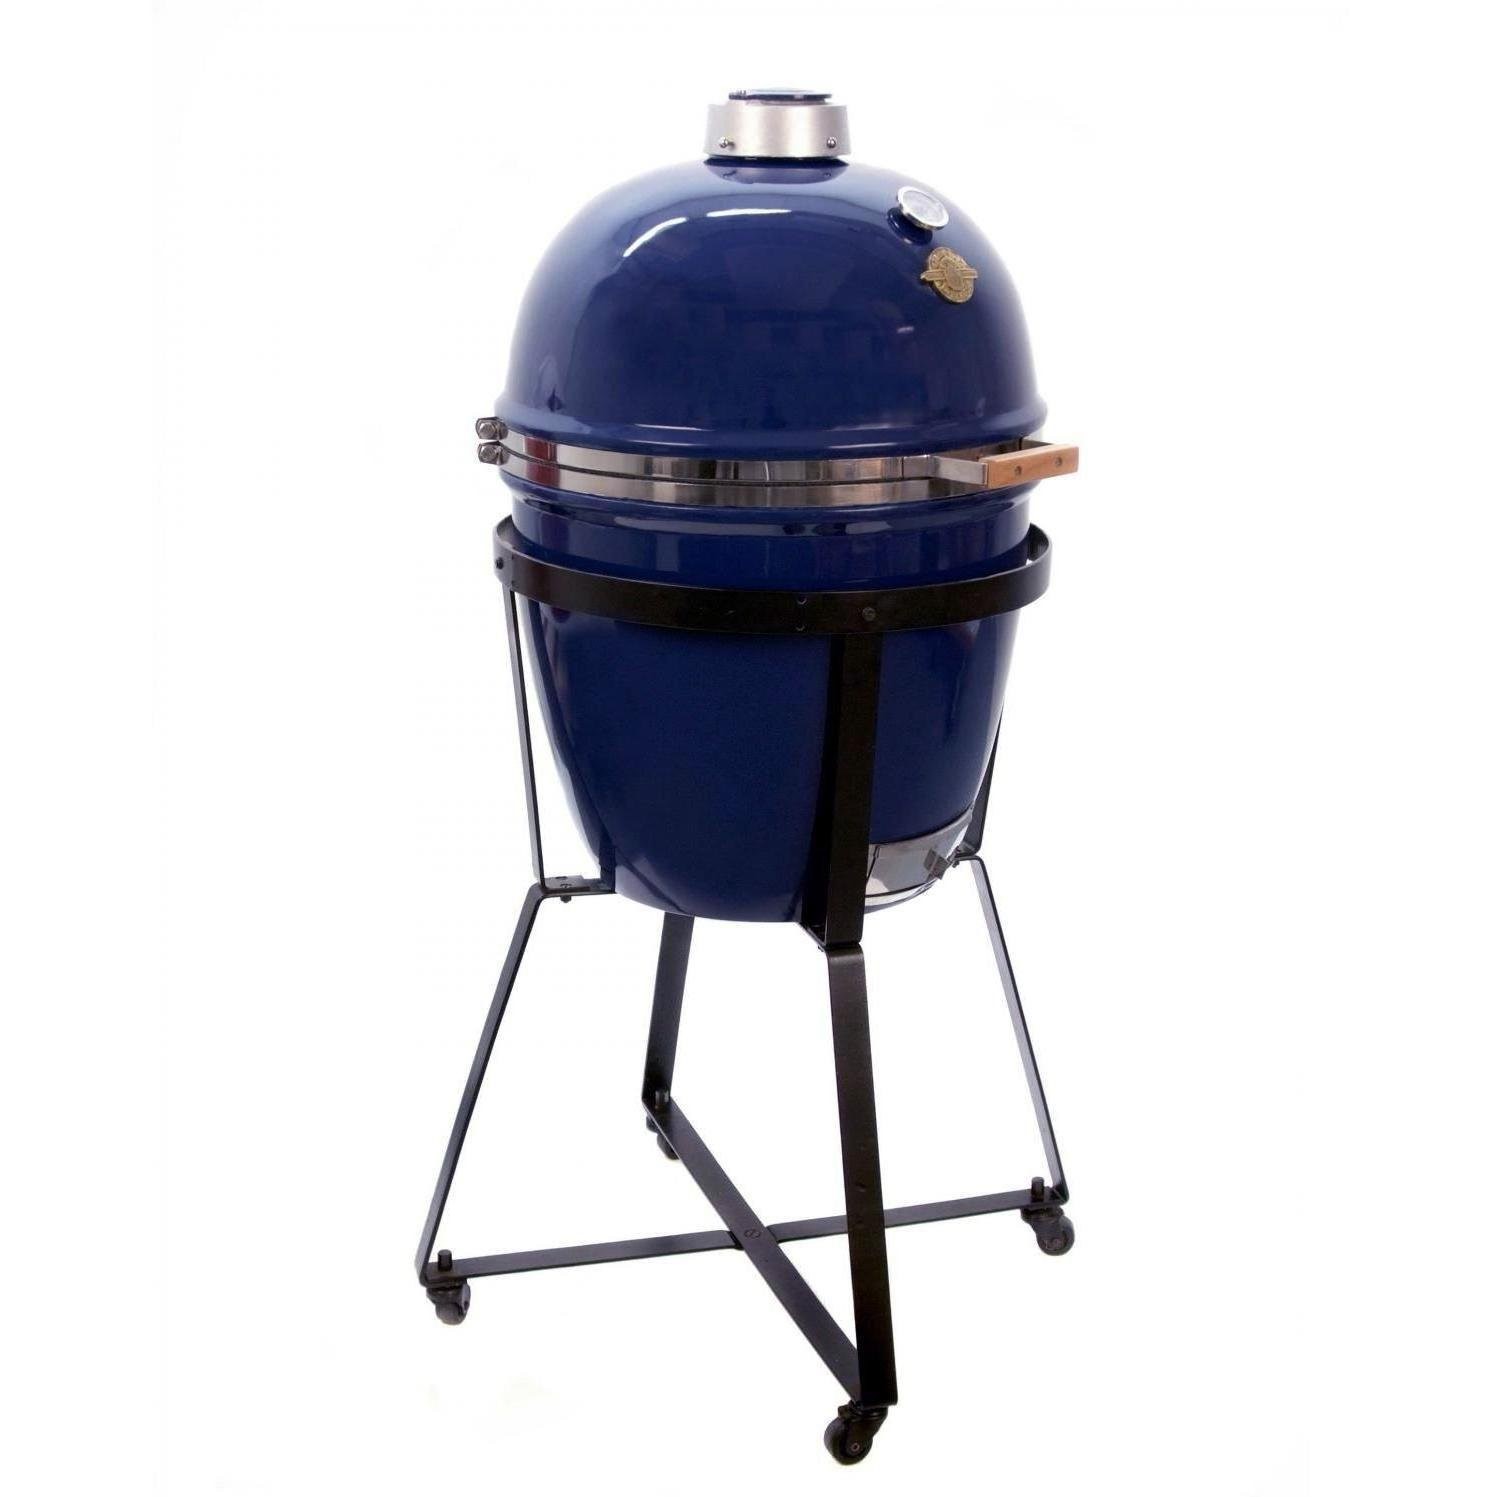 Check out Top 5 Kamado Grills are Value for Money at https://diyprojects.com/top-5-kamado-grills-are-value-for-money/